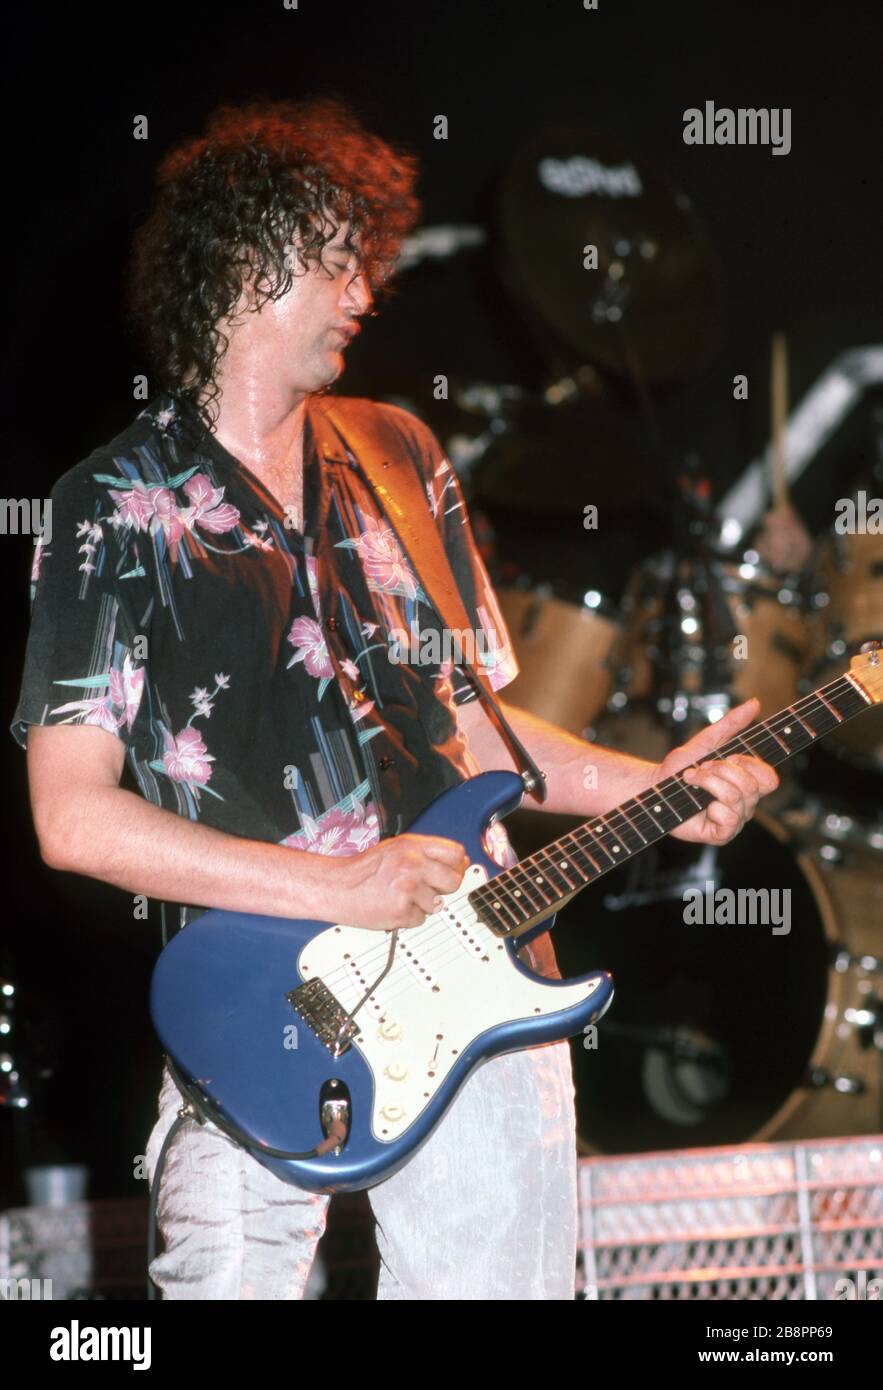 DETROIT - MAY 2: The Firm, including former lead guitarist for Led Zeppelin, Jimmy Page, and former lead singer for Free and Bad Company, Paul Rodgers, perform on May 2, 1986, at the Joe Louis Arena in Detroit, Michigan. Credit: Ross Marino Archive / MediaPunch Stock Photo